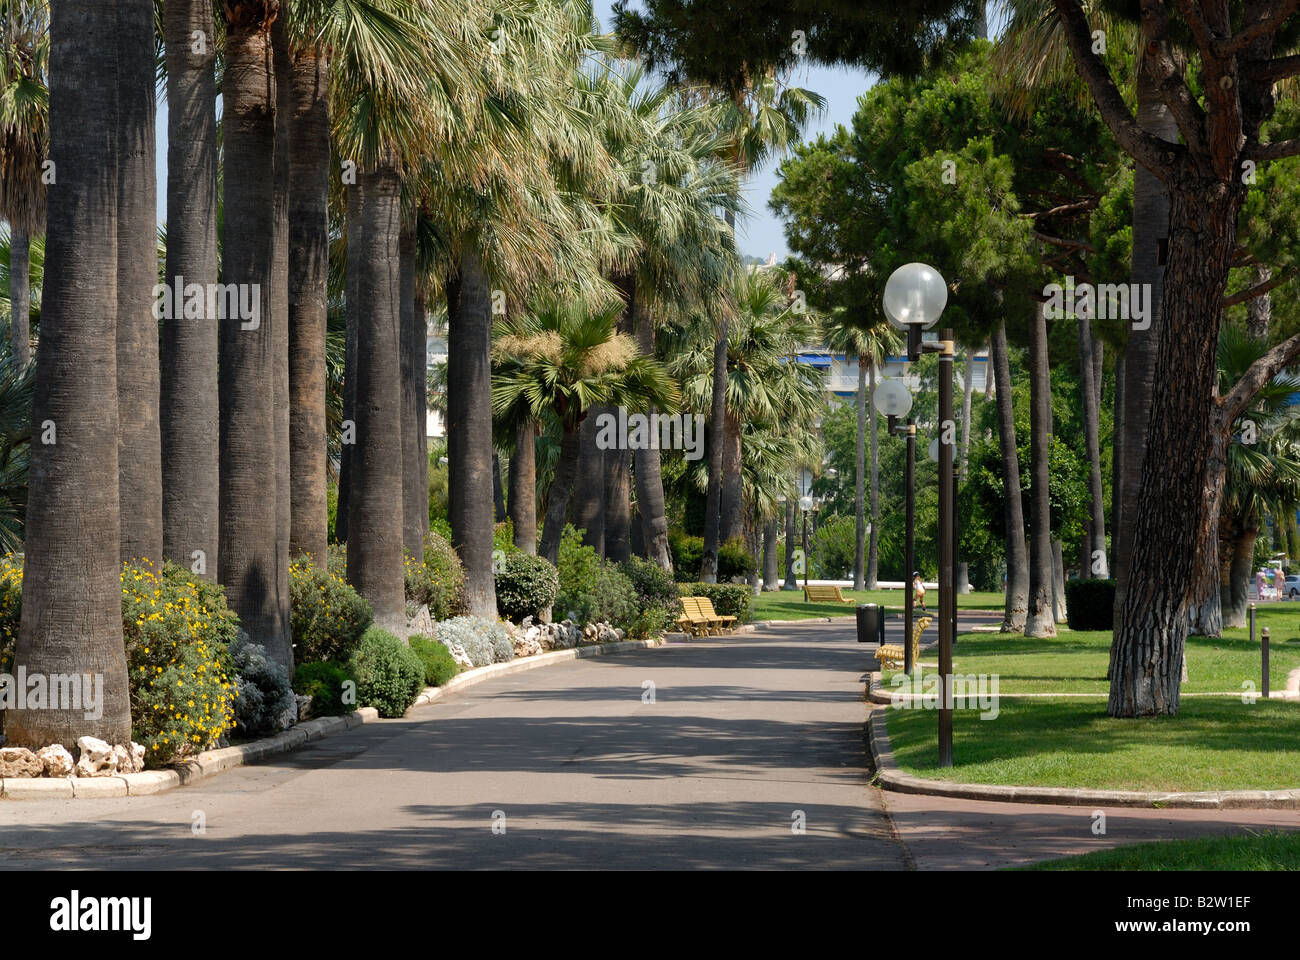 Palm trees in a park in Cannes, France Stock Photo